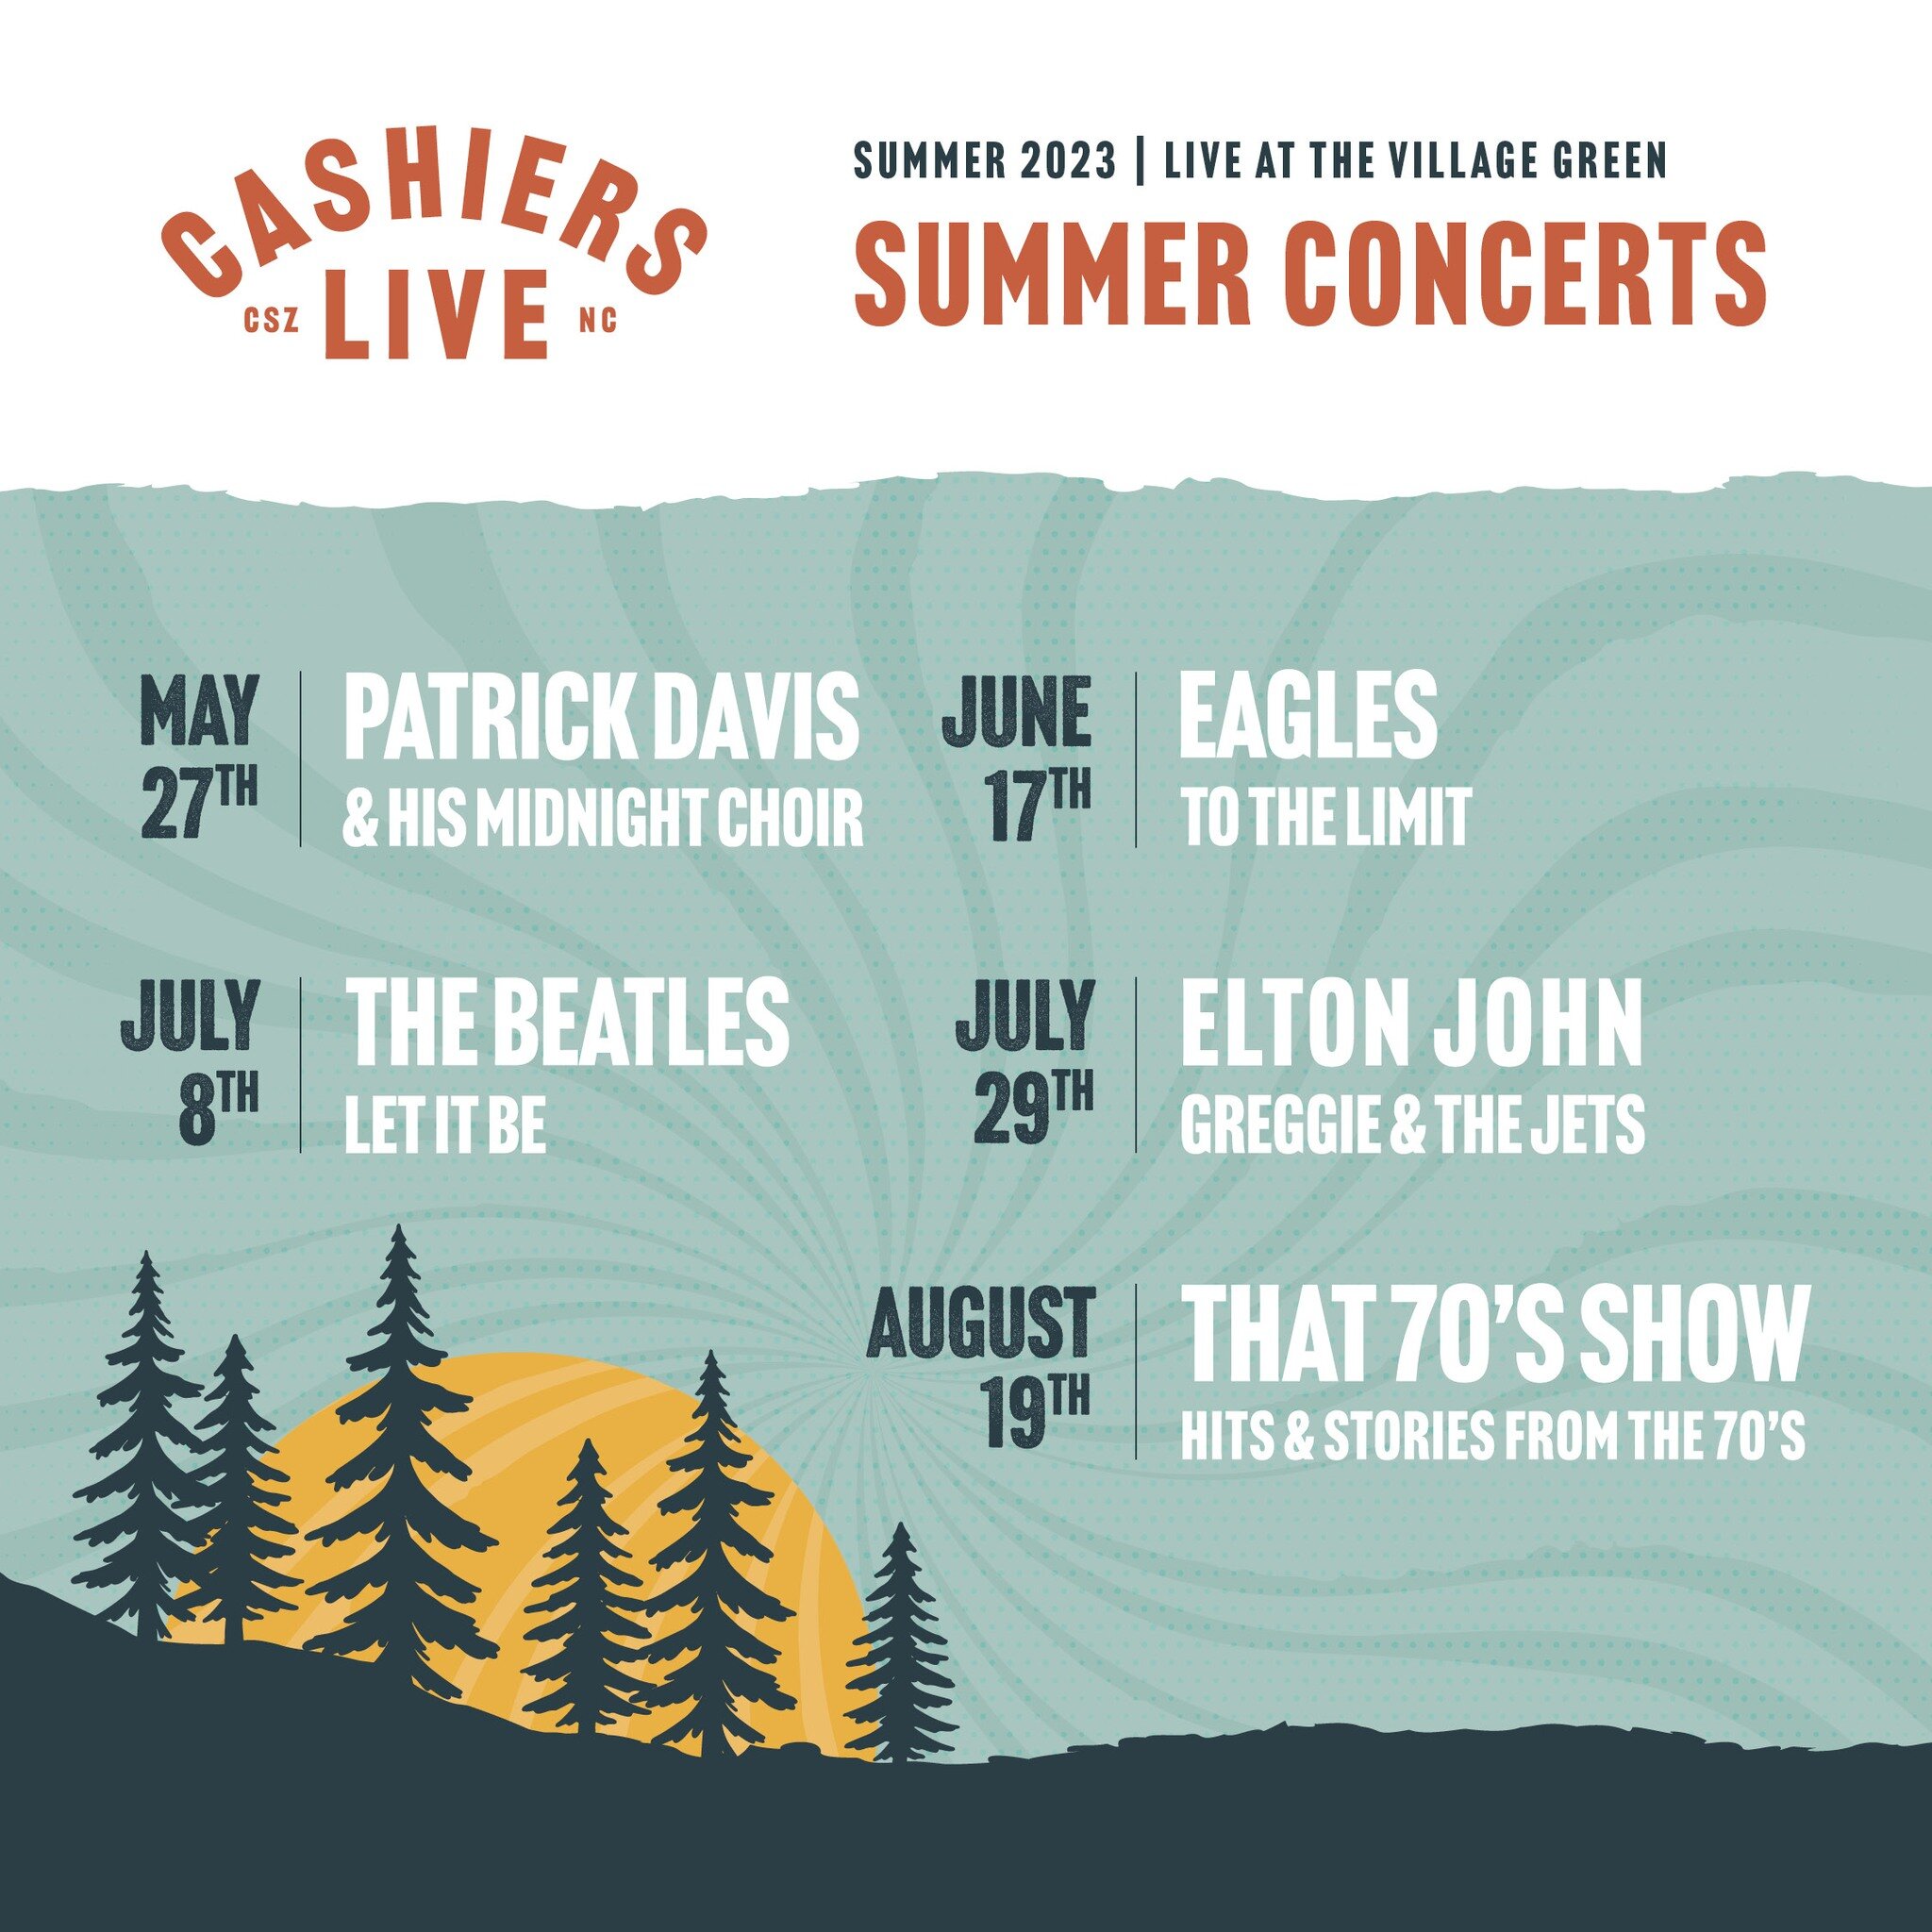 Spend your summer at @cashiersgreen! Cashiers Live is back on May 27th, June 17th, July 8th, July 29th, and August 19th to celebrate the songs that defined a generation, and the stories behind them. Featuring music by Elton John, The Beatles, and mor